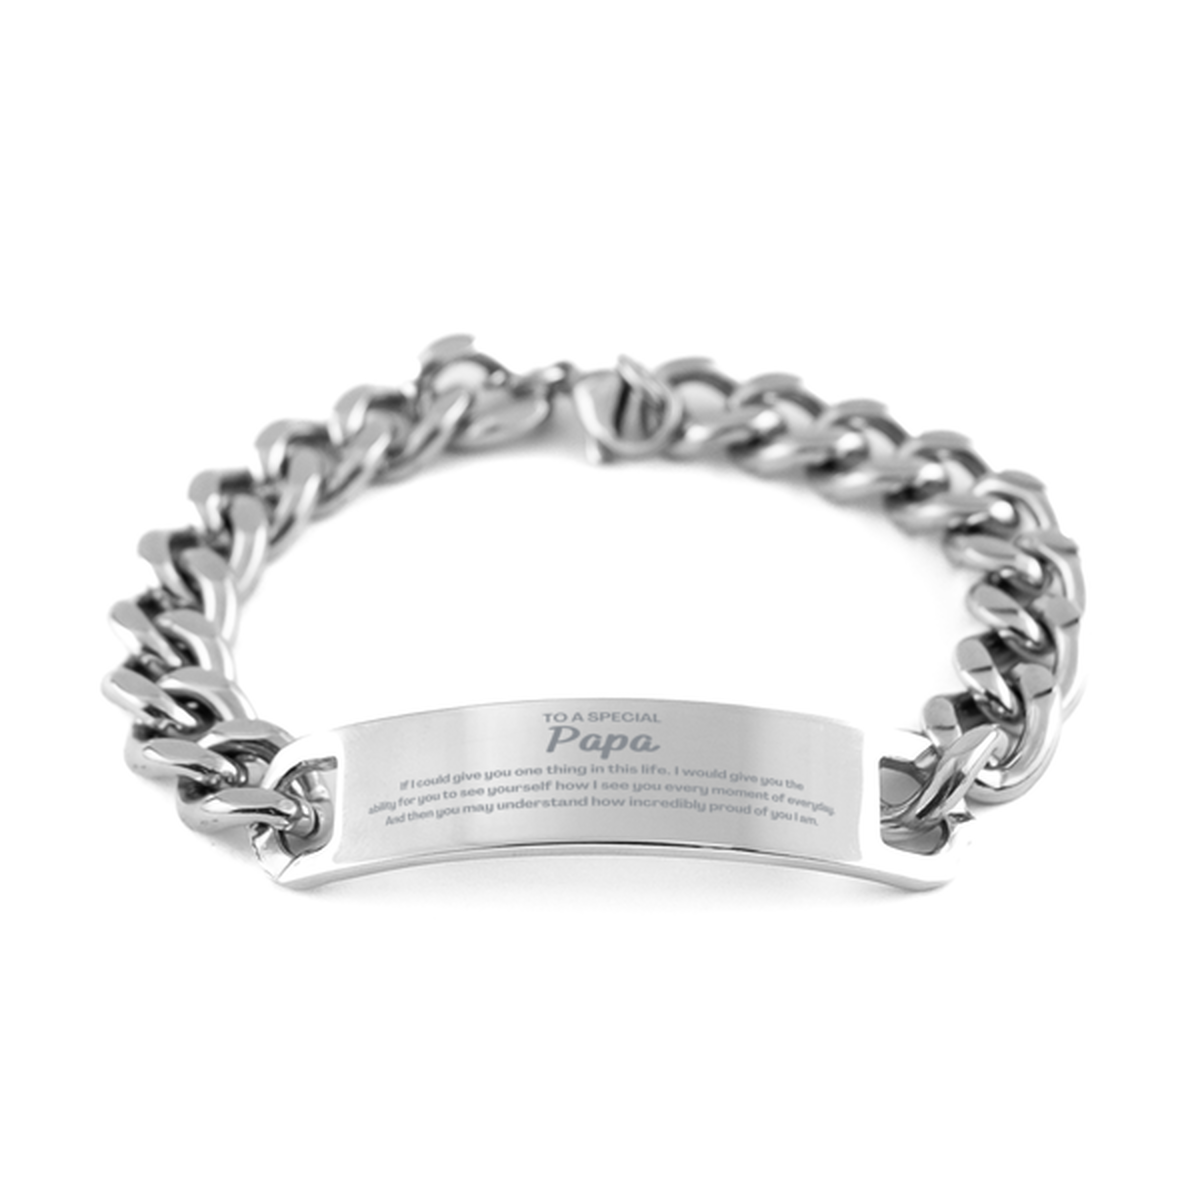 To My Papa Cuban Chain Stainless Steel Bracelet, Gifts For Papa Engraved, Inspirational Gifts for Christmas Birthday, Epic Gifts for Papa To A Special Papa how incredibly proud of you I am